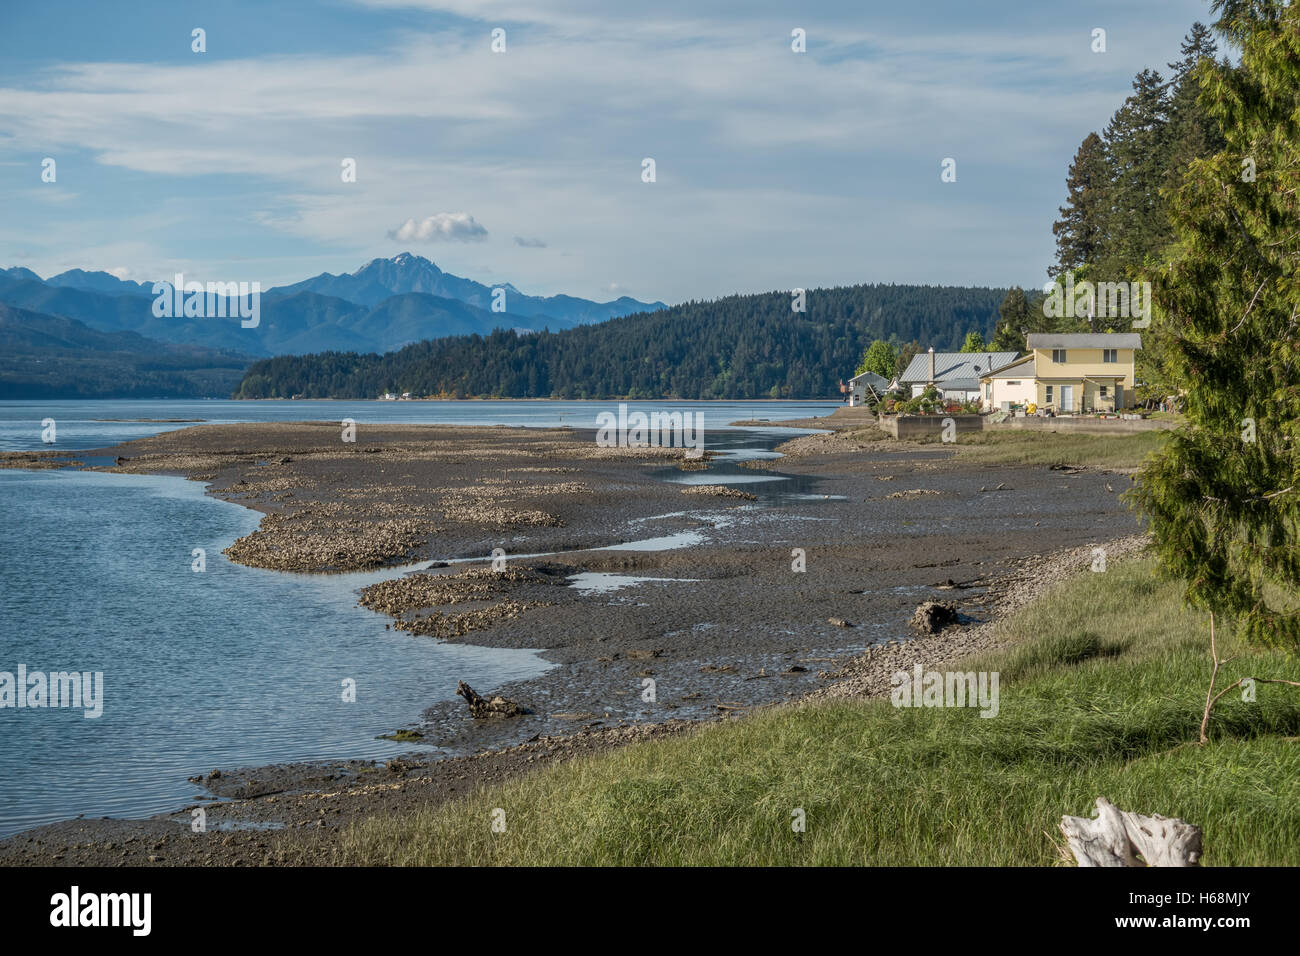 A view looking north from the south end of Hood Canal in Washington State. The Olympic Mountains can be seen in the distance. Stock Photo